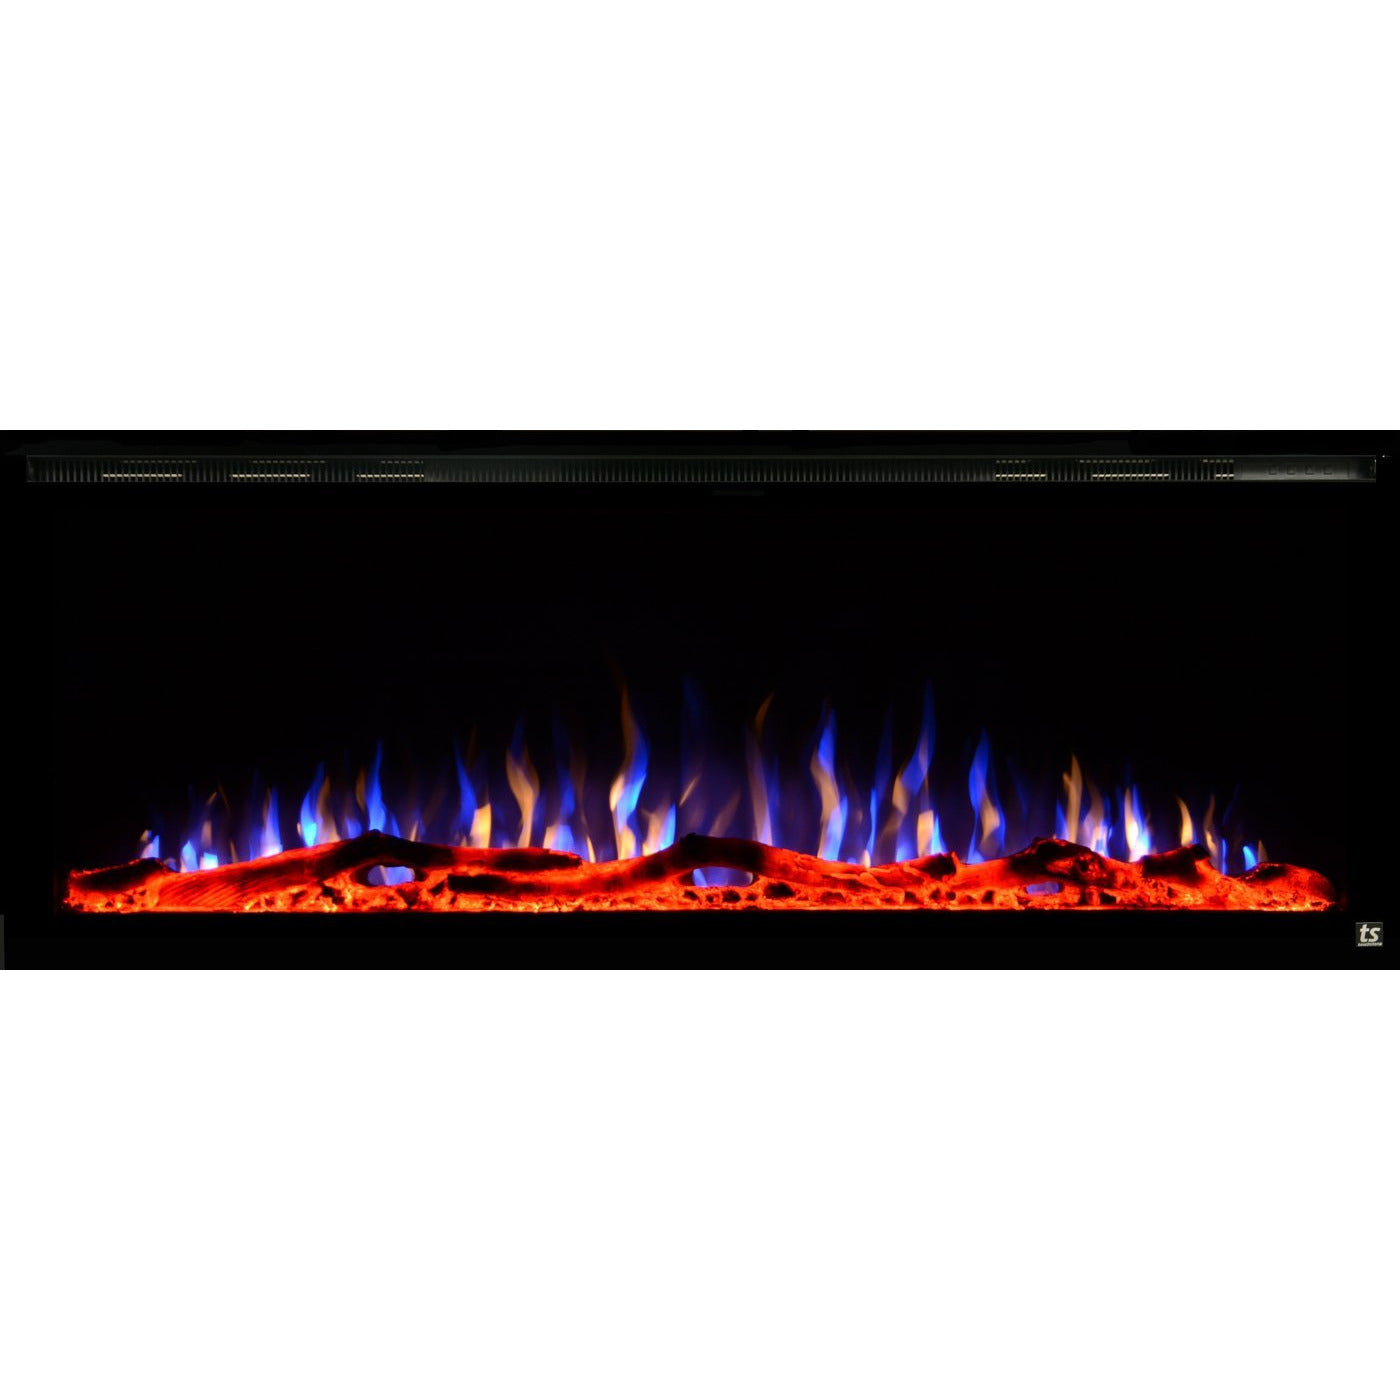 Black Touchstone Sideline Elite Recessed Electric Fireplace in combination of blue,yellow, purple flame with orange crystals.